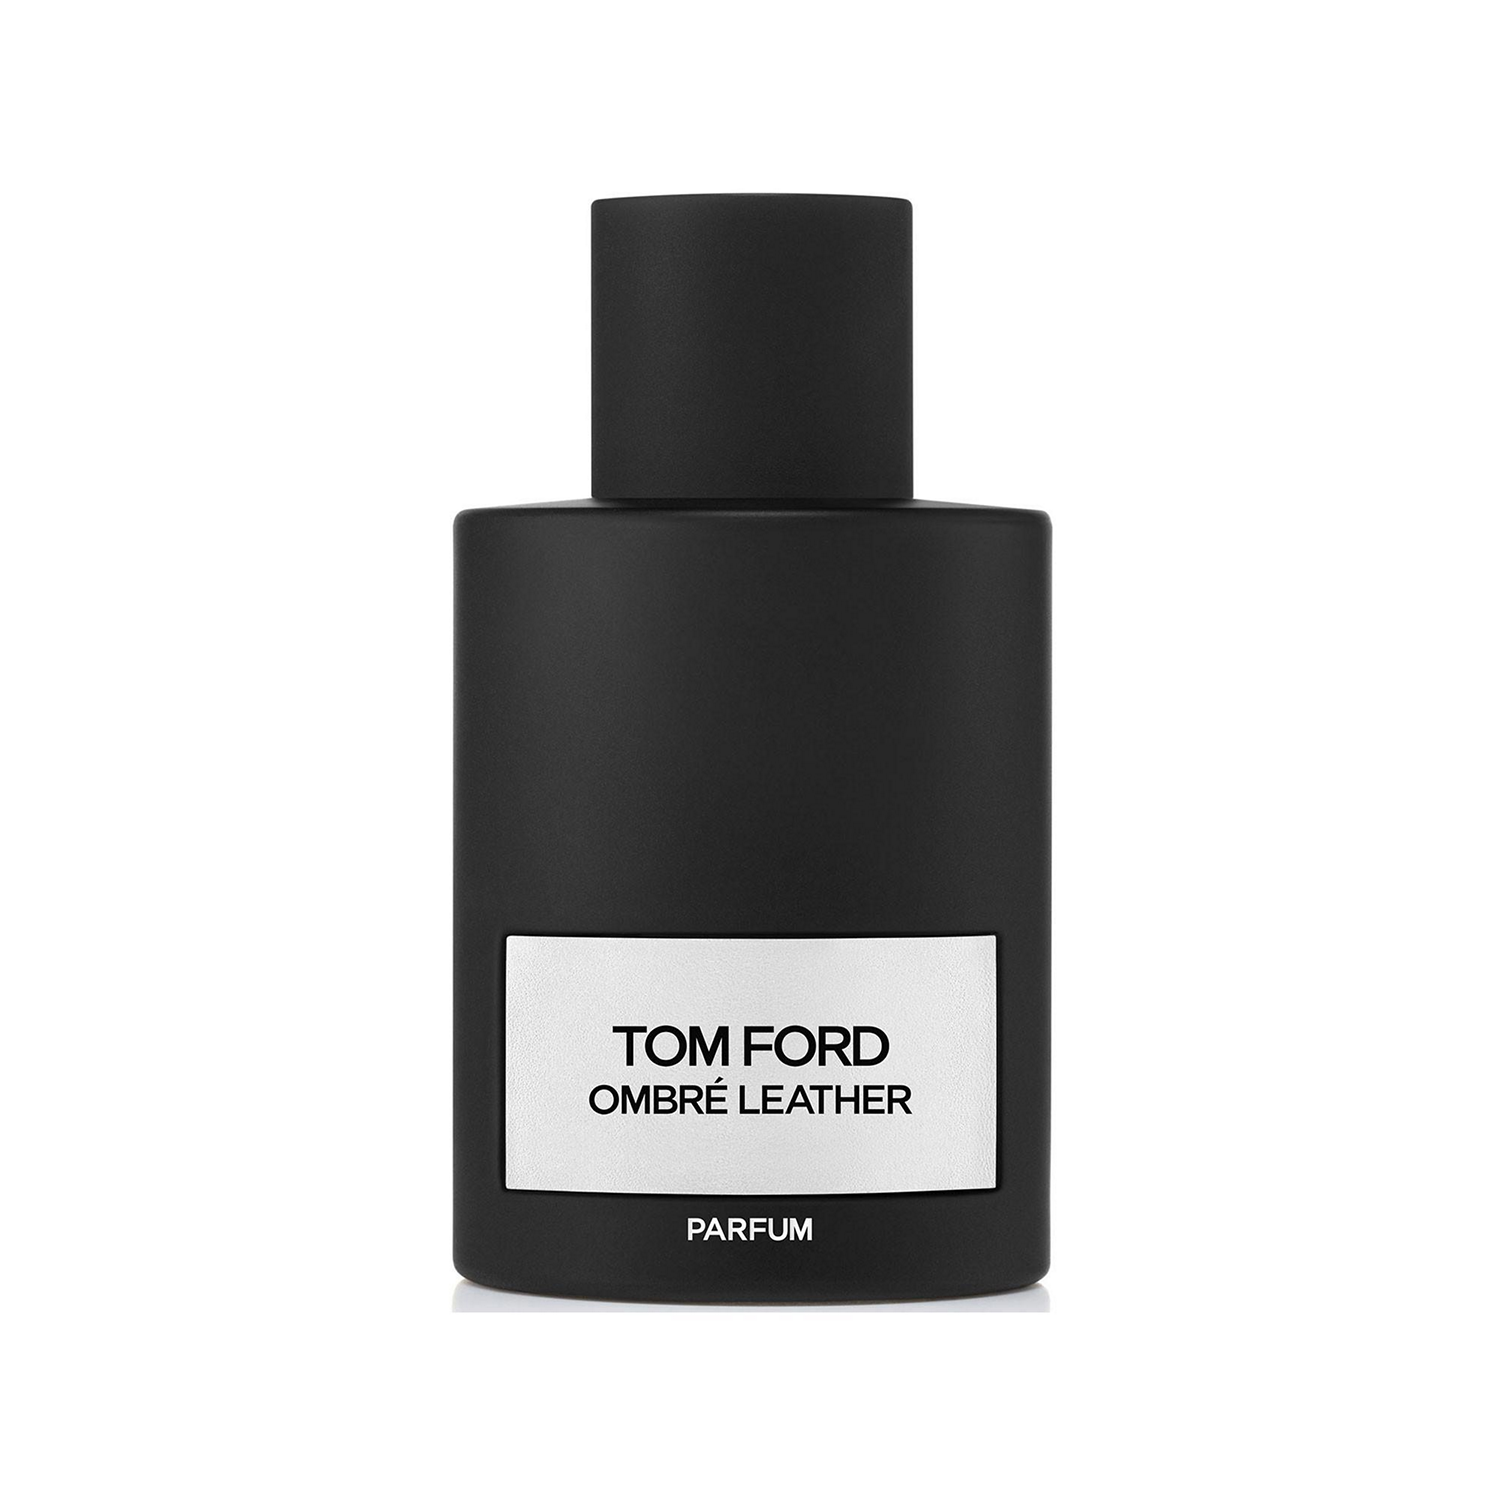 Tom Ford – Ombre Leather Parfum 50ml